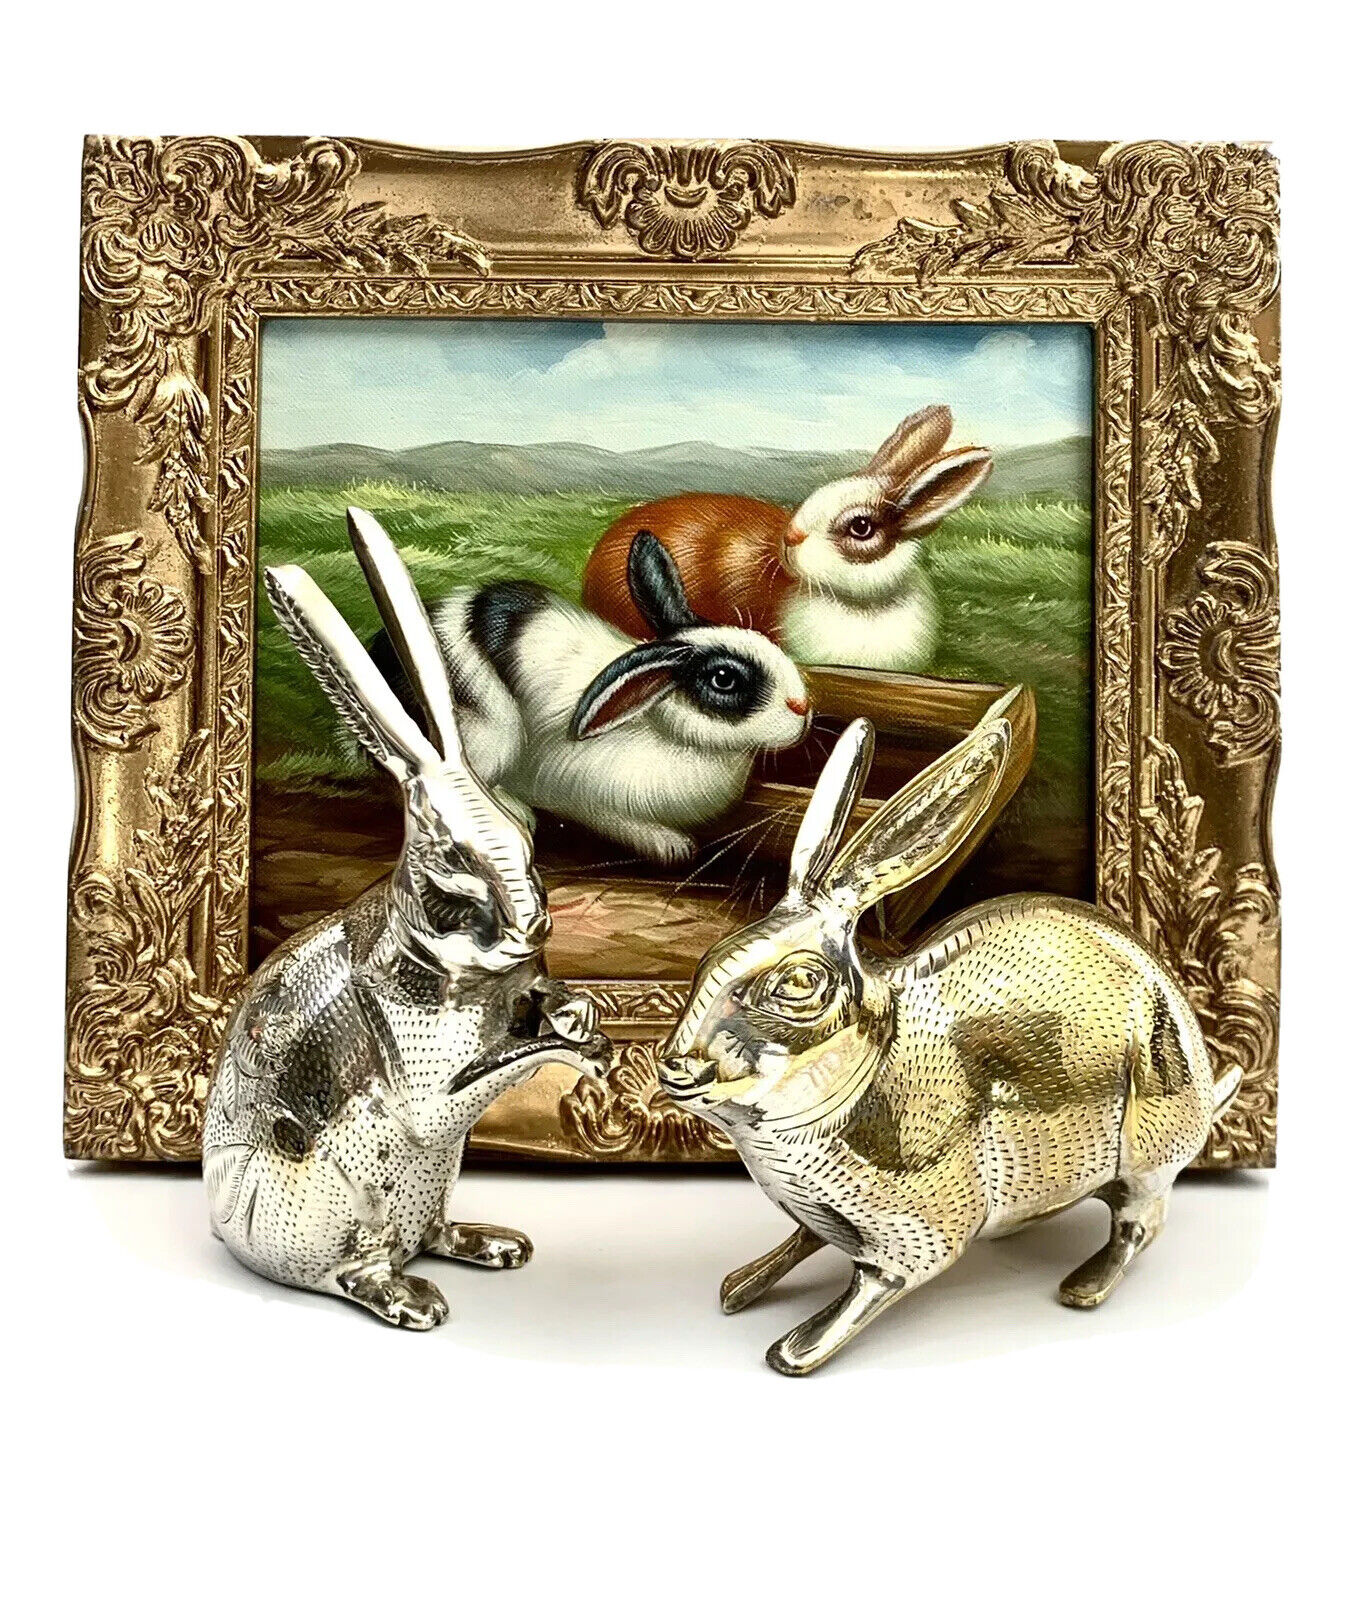 Bunnies / Rabbits / Hares Pair of Metal Figurines Vintage Home Decor